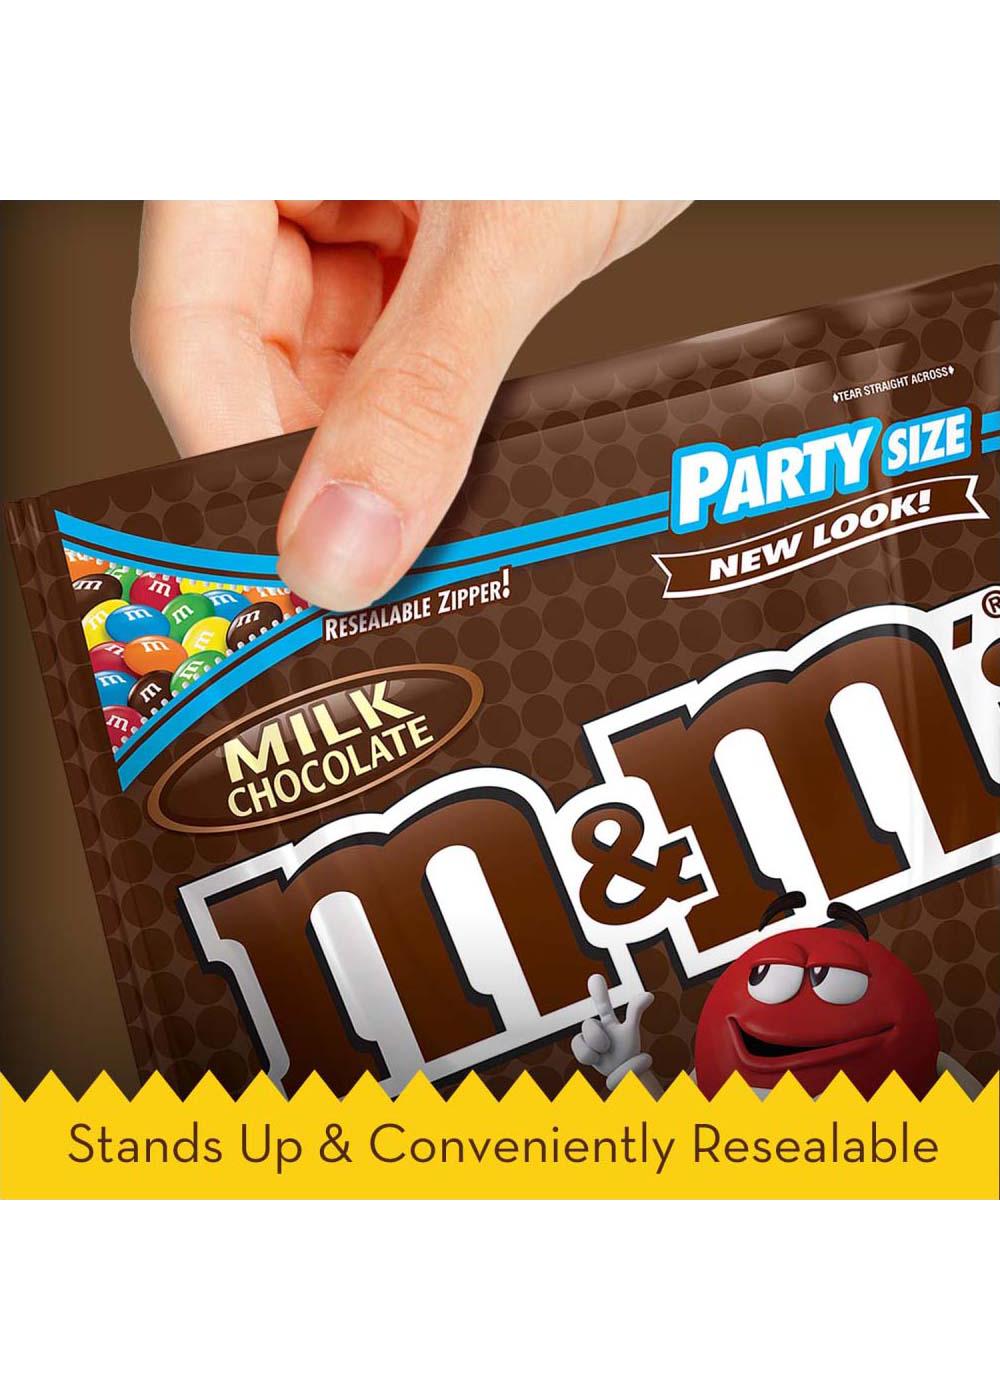 M&MS Milk Chocolate Candy Sharing Size Bag, 10.7 oz